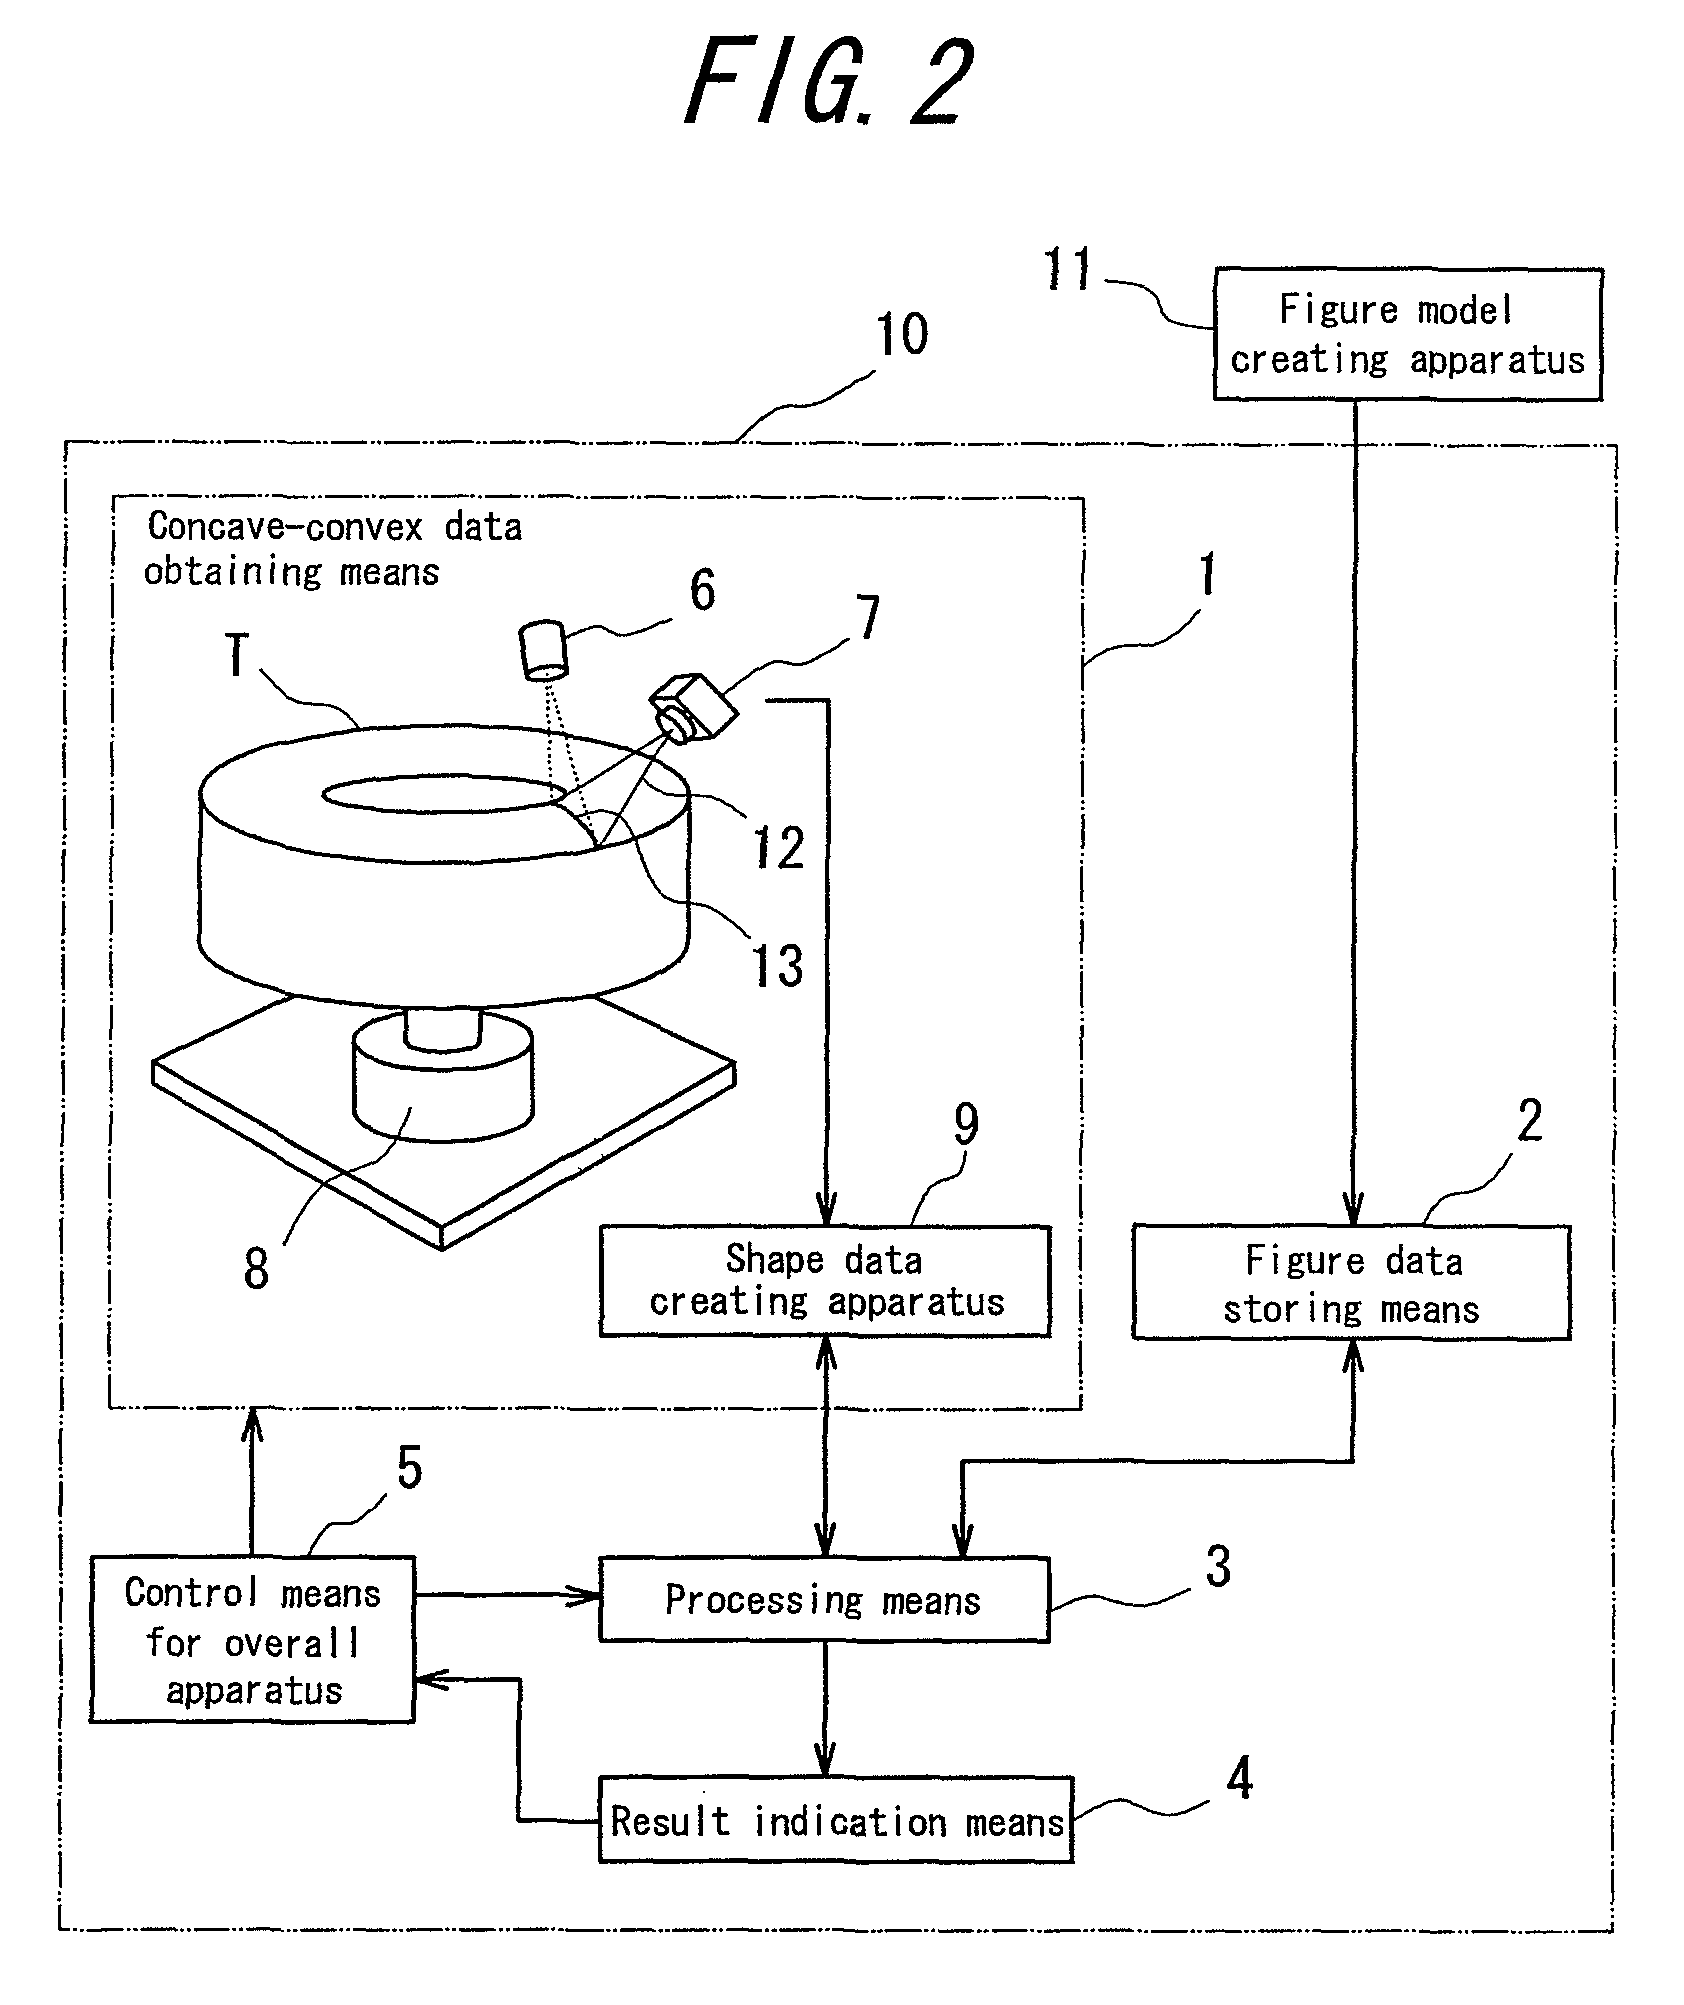 Method of creating master data used for inspecting concave-convex figure